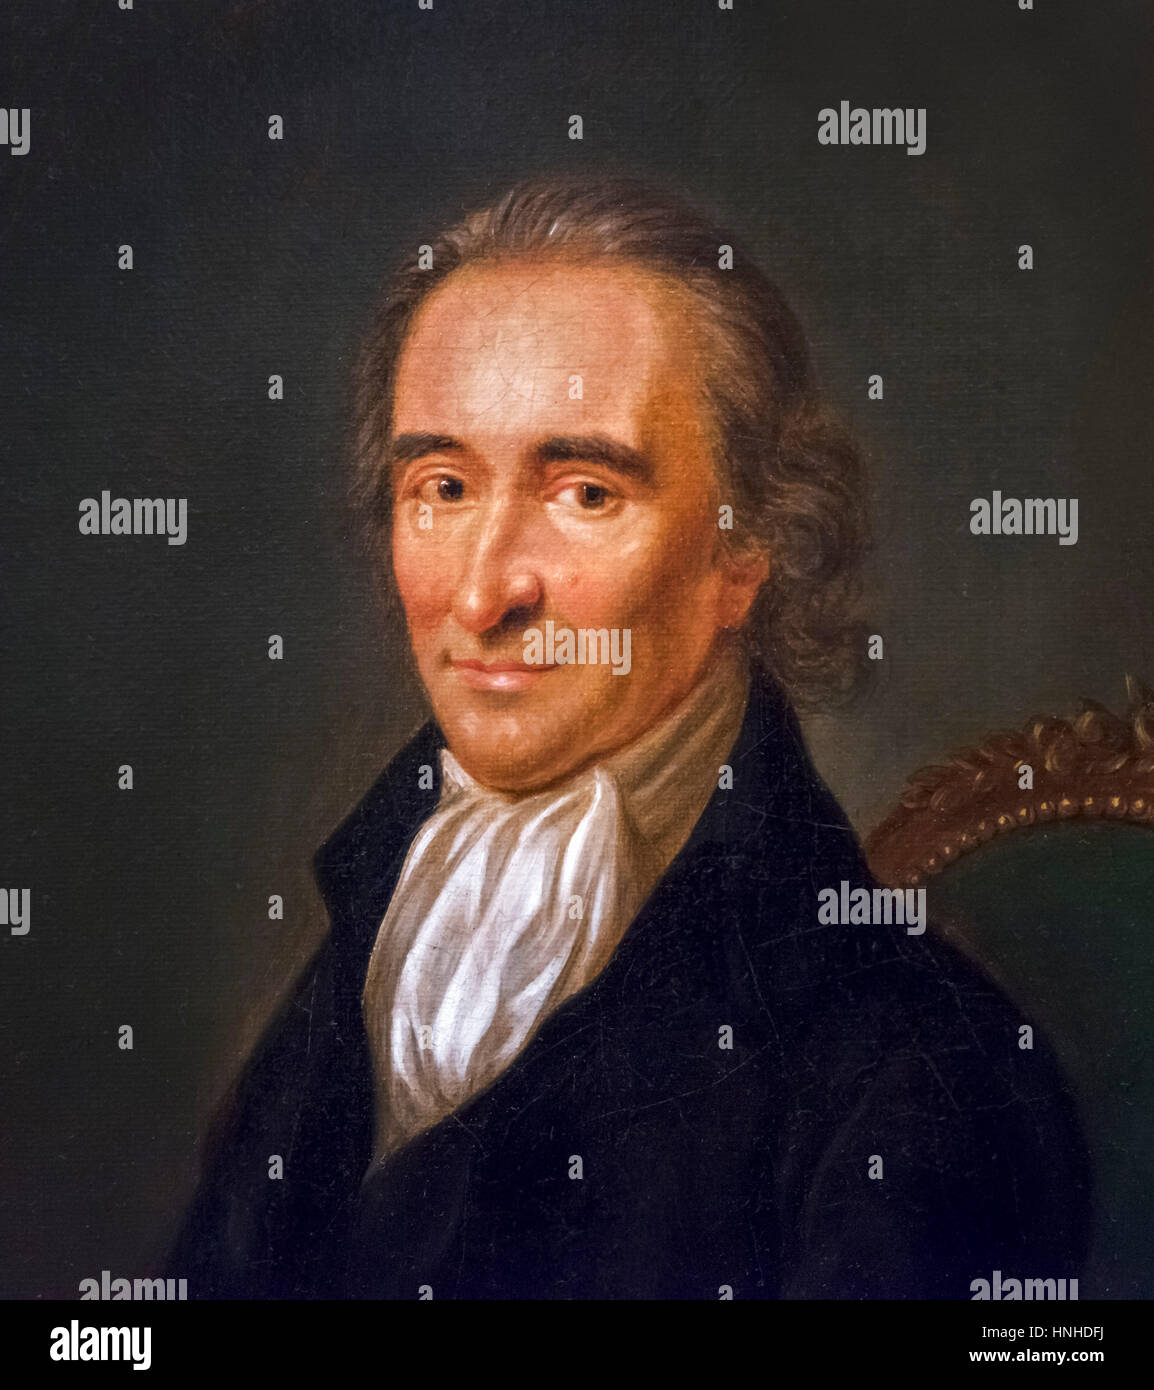 Thomas Paine, the English born activist and philosopher, whose pamphlet Common Sense (1776) crystallized the rebellious demand for independence from Great Britain, portrait by Laurent Dabos, oil on canvas, c.1792 Stock Photo